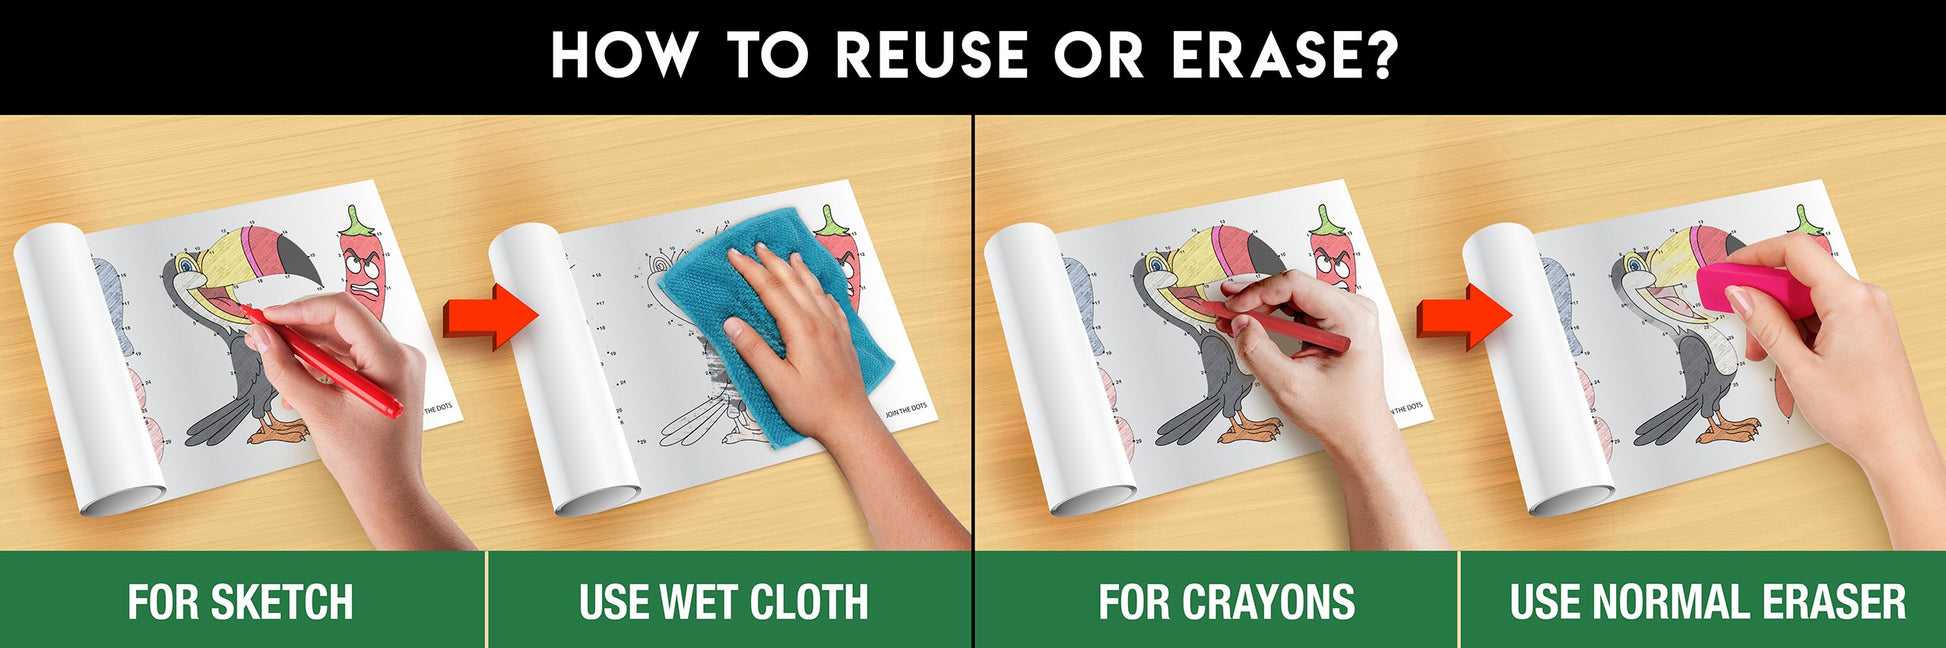 The image has four pictures demonstrating how to reuse or erase: the first picture depicts sketching on the sheet, the second shows using a wet cloth to remove sketches, the third image displays crayons coloring on the join the dots sheet, and the fourth image illustrates erasing crayons with a regular eraser.